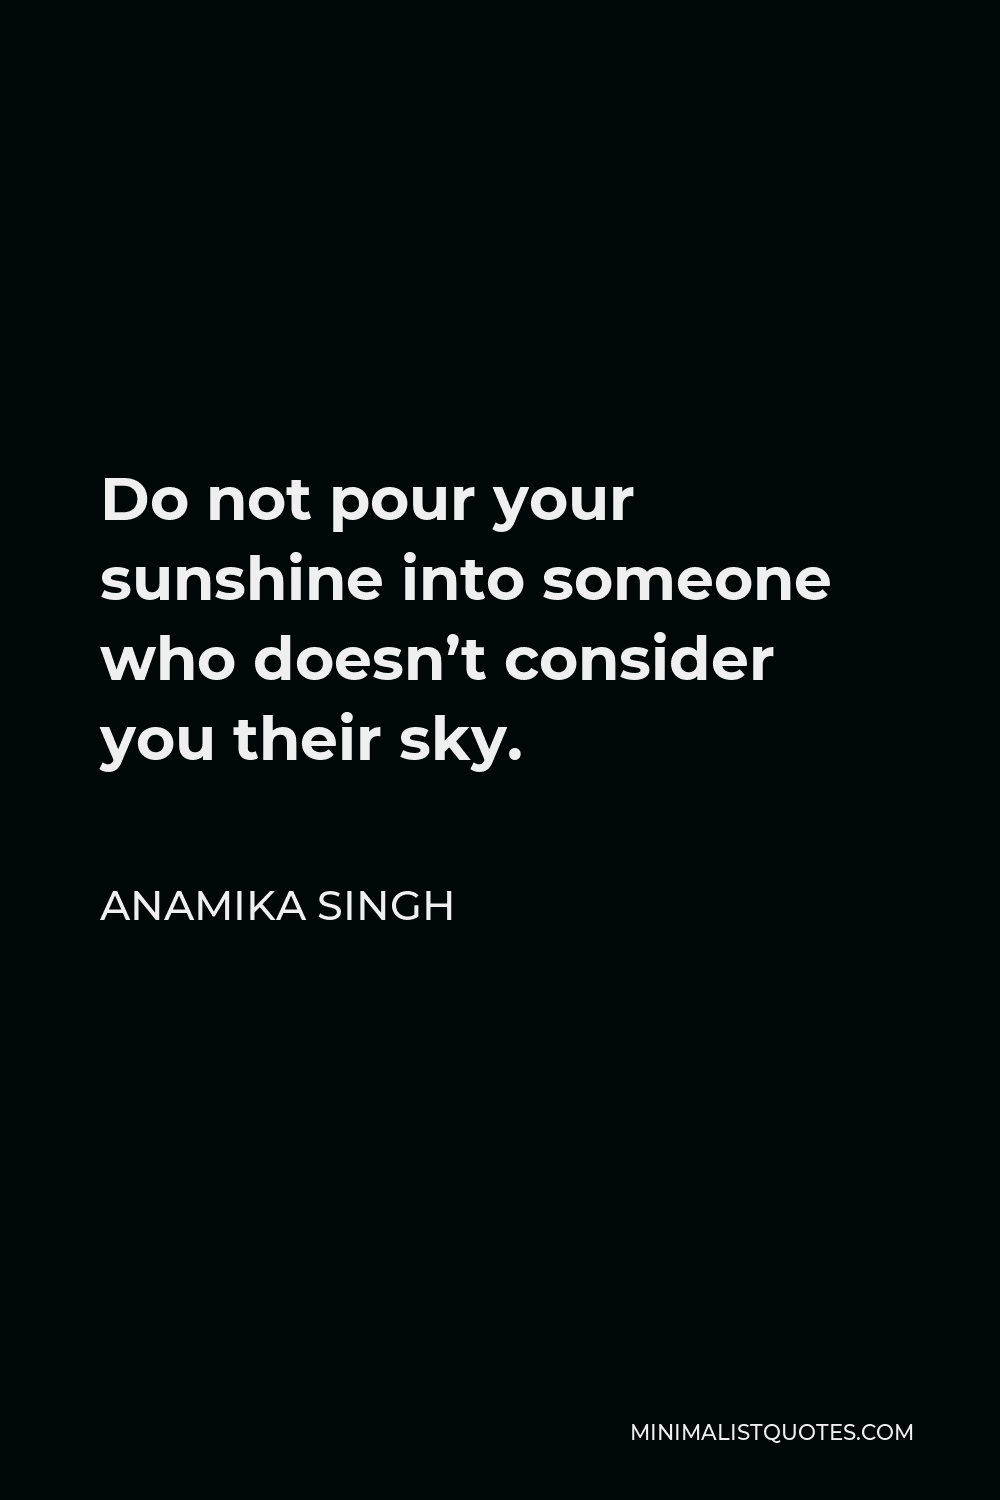 Anamika Singh Quote - Do not pour your sunshine into someone who doesn’t consider you their sky.